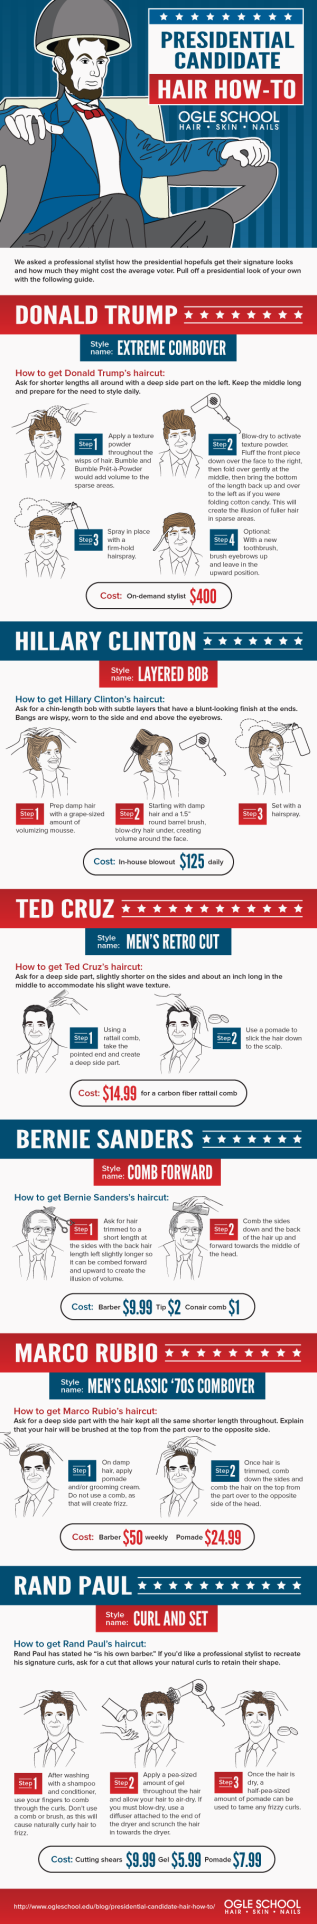 What Can Presidential Candidates Can Teach You About Hair Styles?